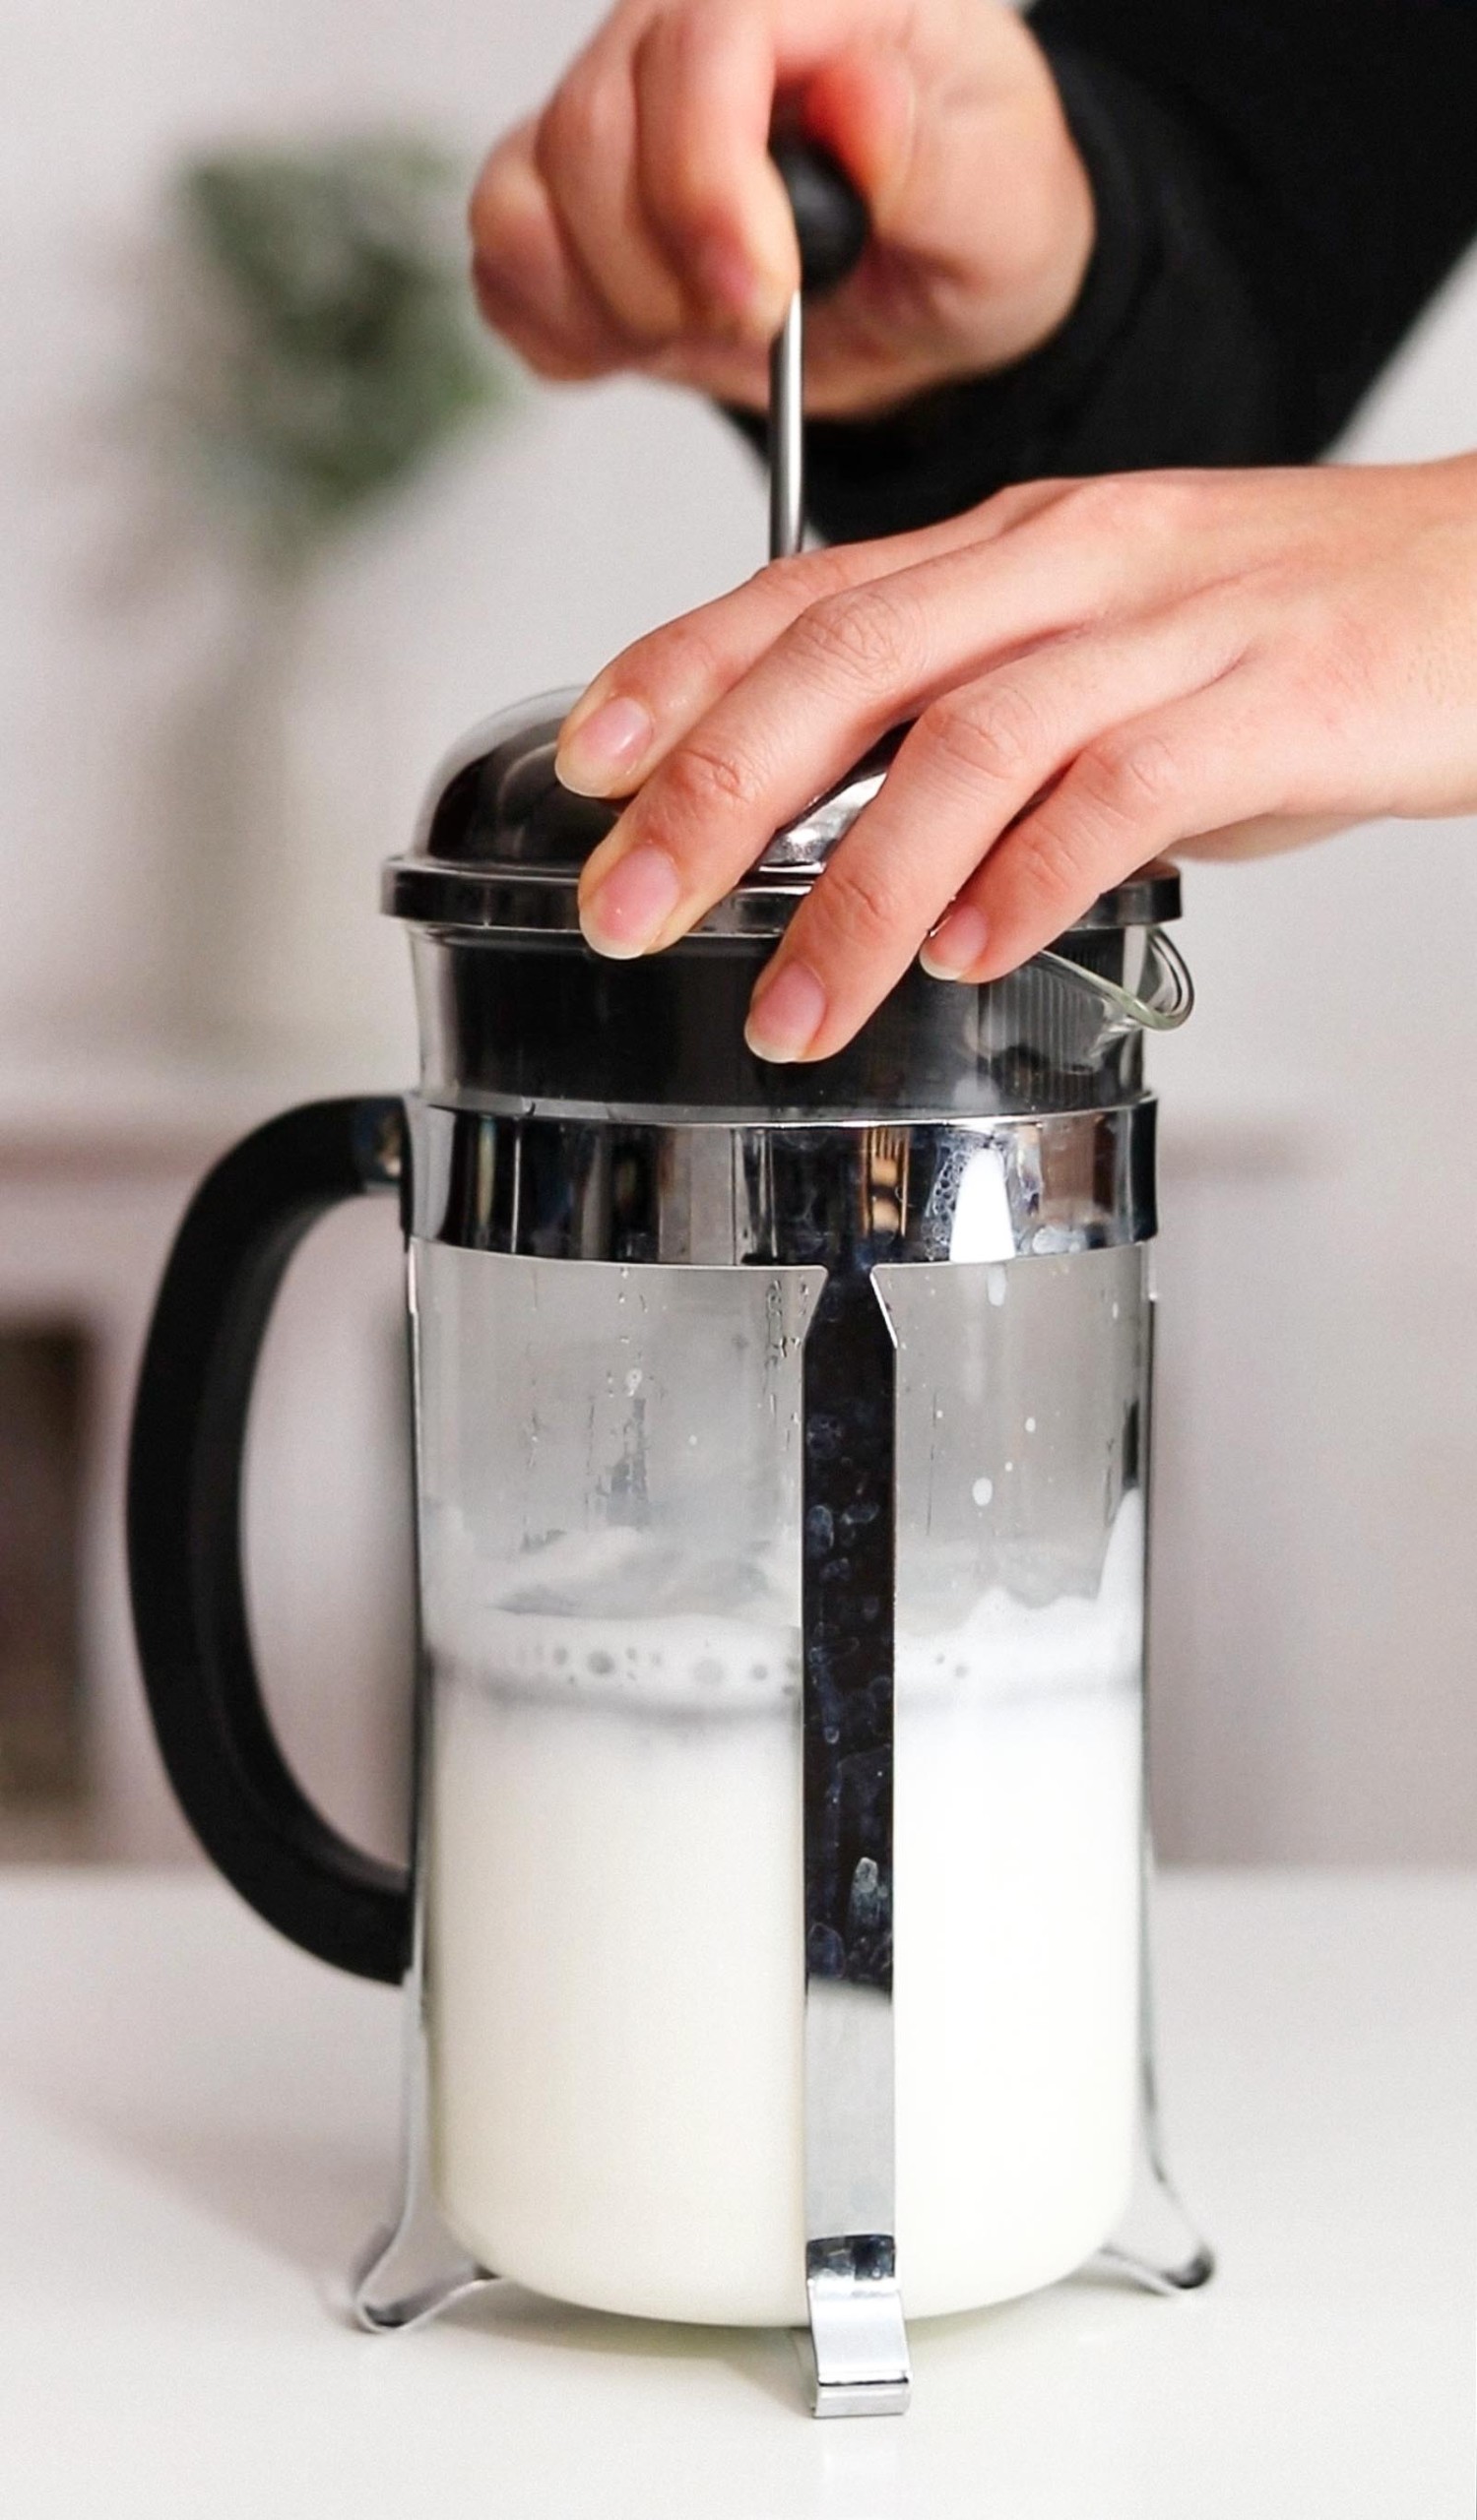 https://www.yesmooretea.com/wp-content/uploads/2021/12/How-to-Froth-Milk-at-Home-using-a-French-Press-1-scaled.jpg